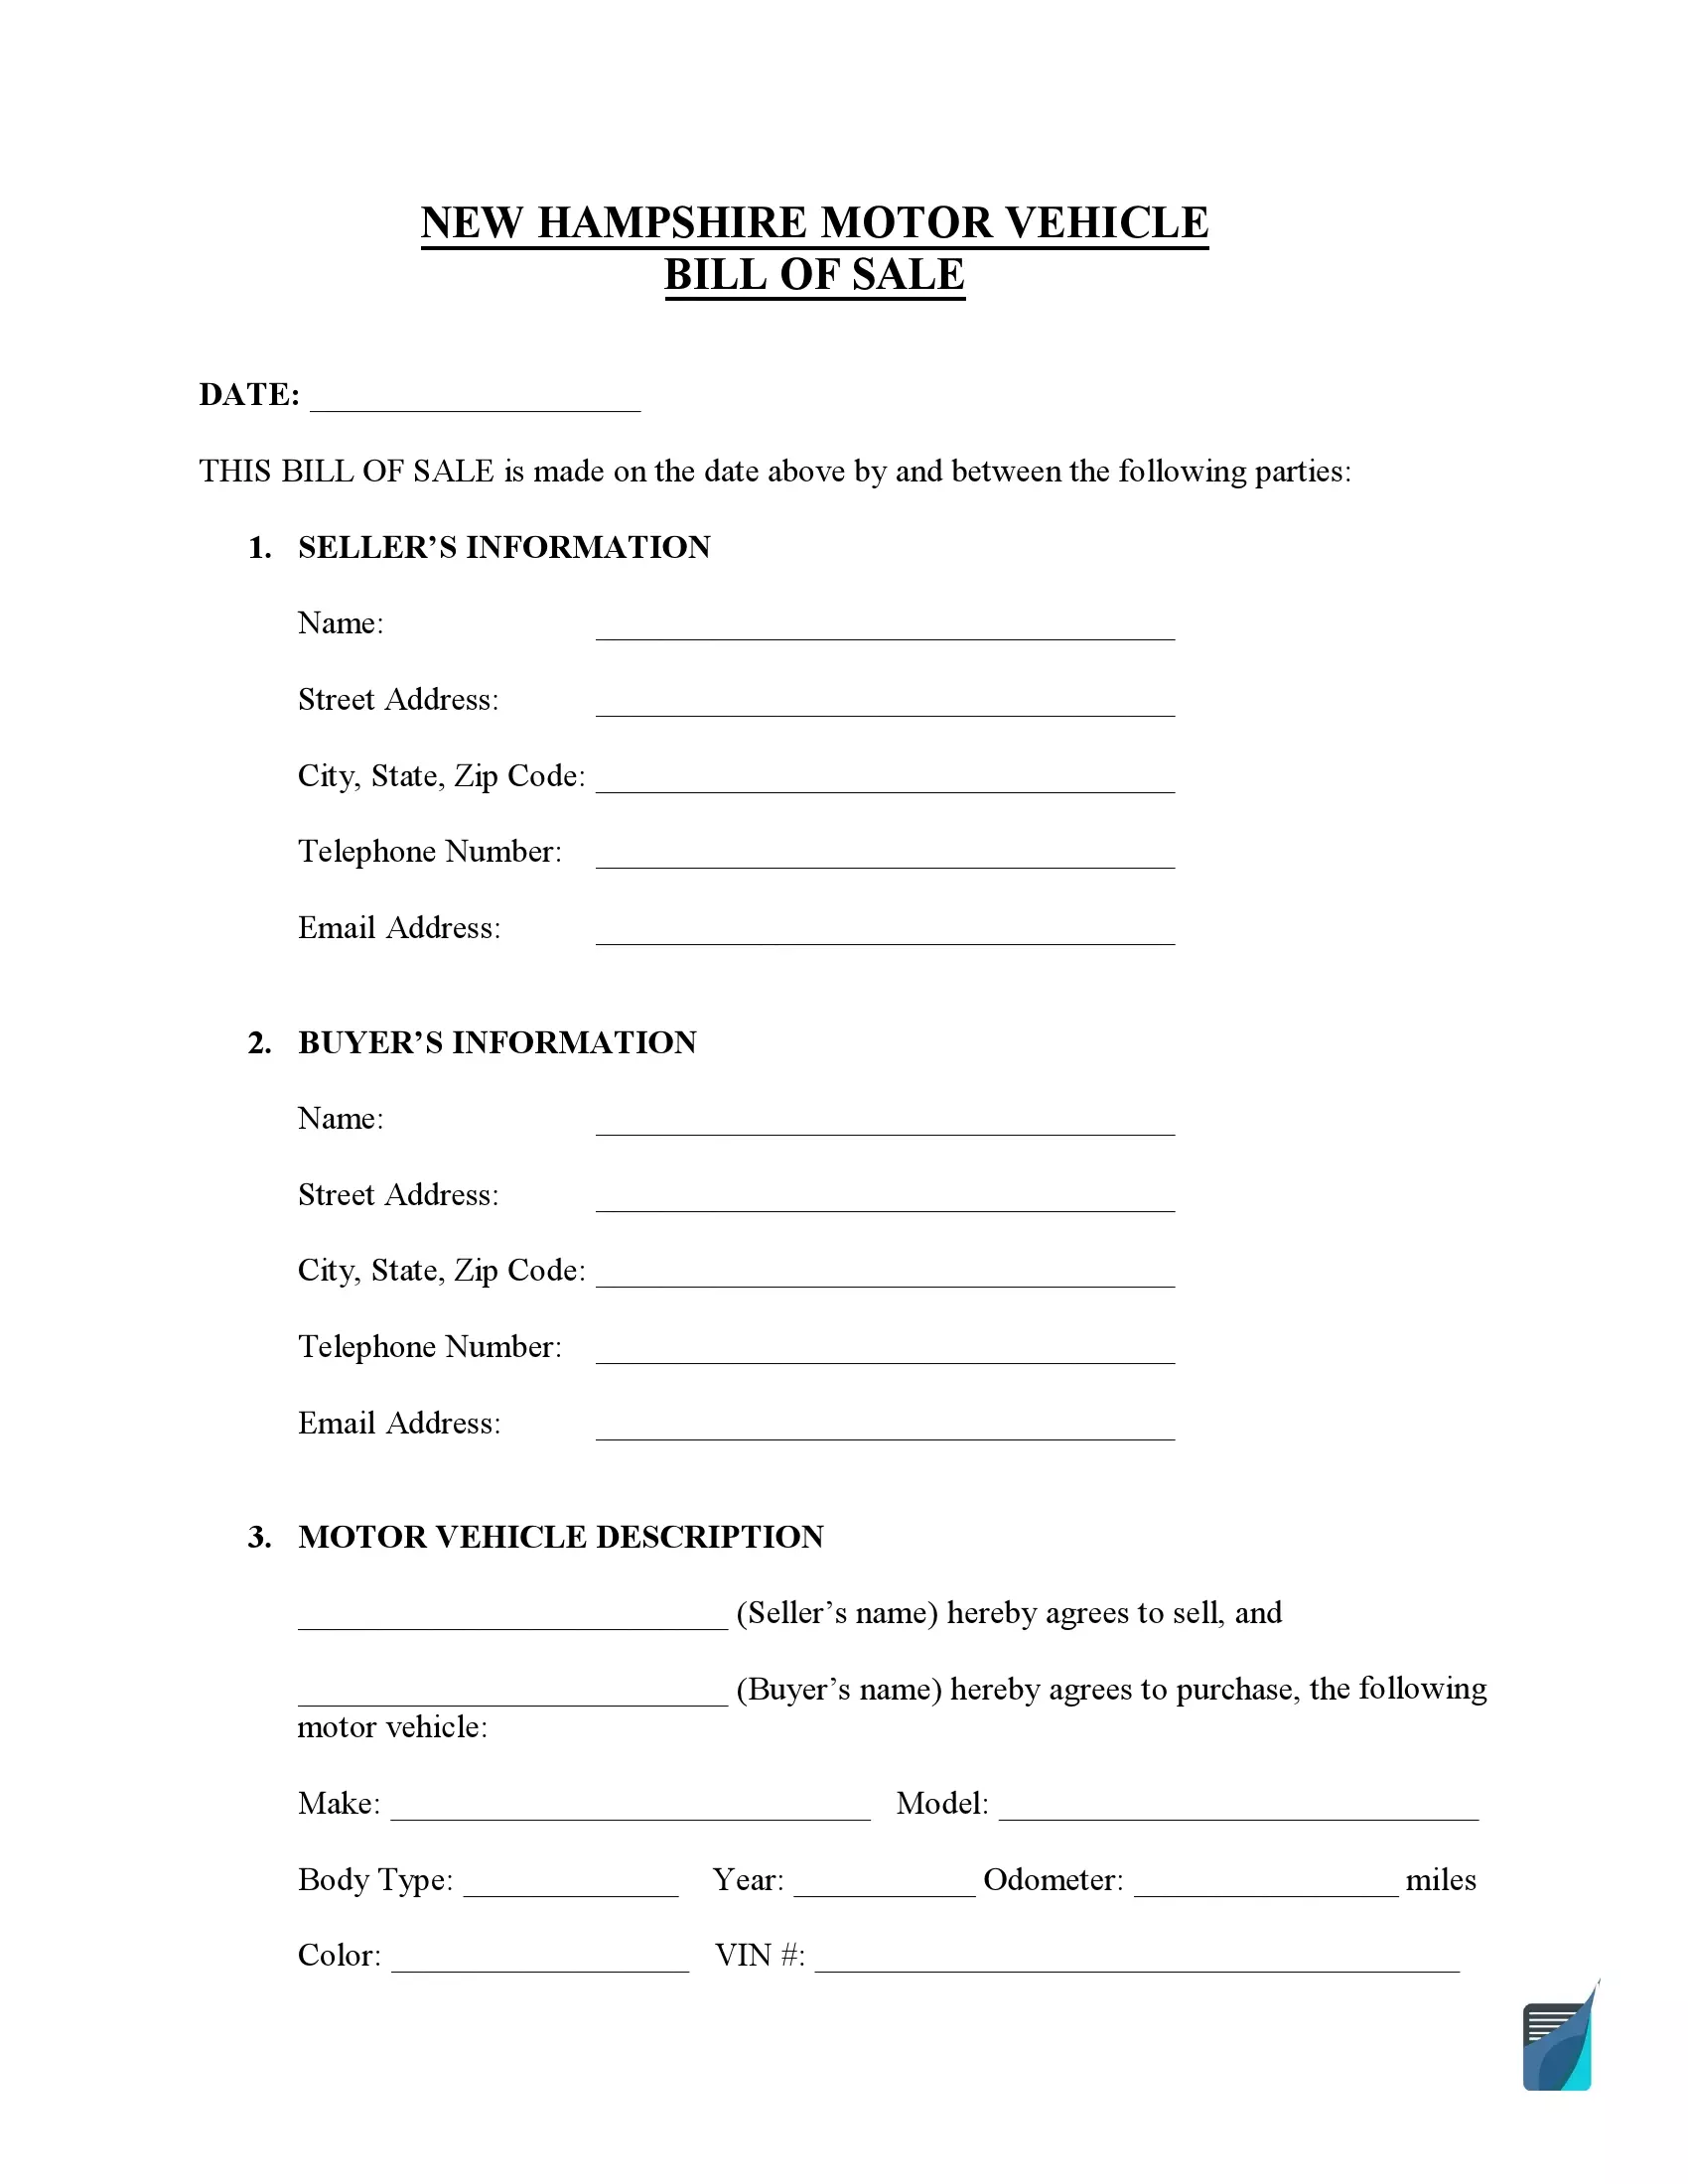 New-Hampshire-motor-vehicle-bill-of-sale-template